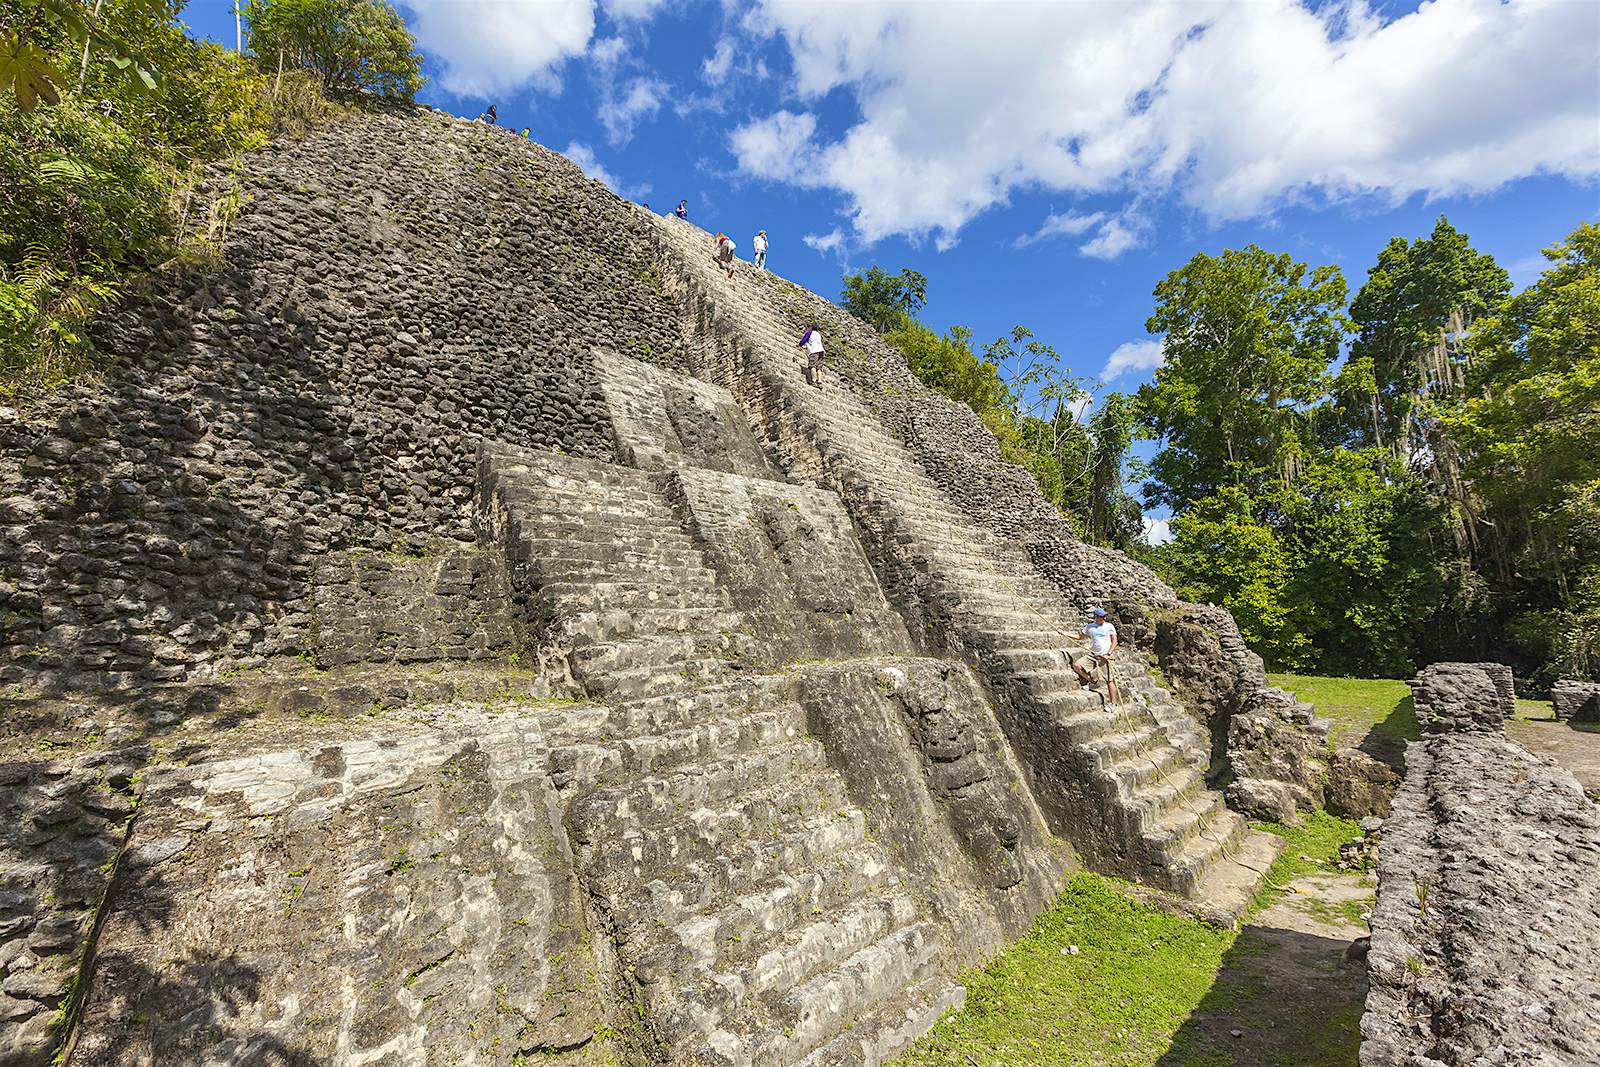 Visitors climb to the top of the Maya ruins in Lamanai, Belize © Patrick J Endres - AlaskaPhotoGraphics / Getty Images